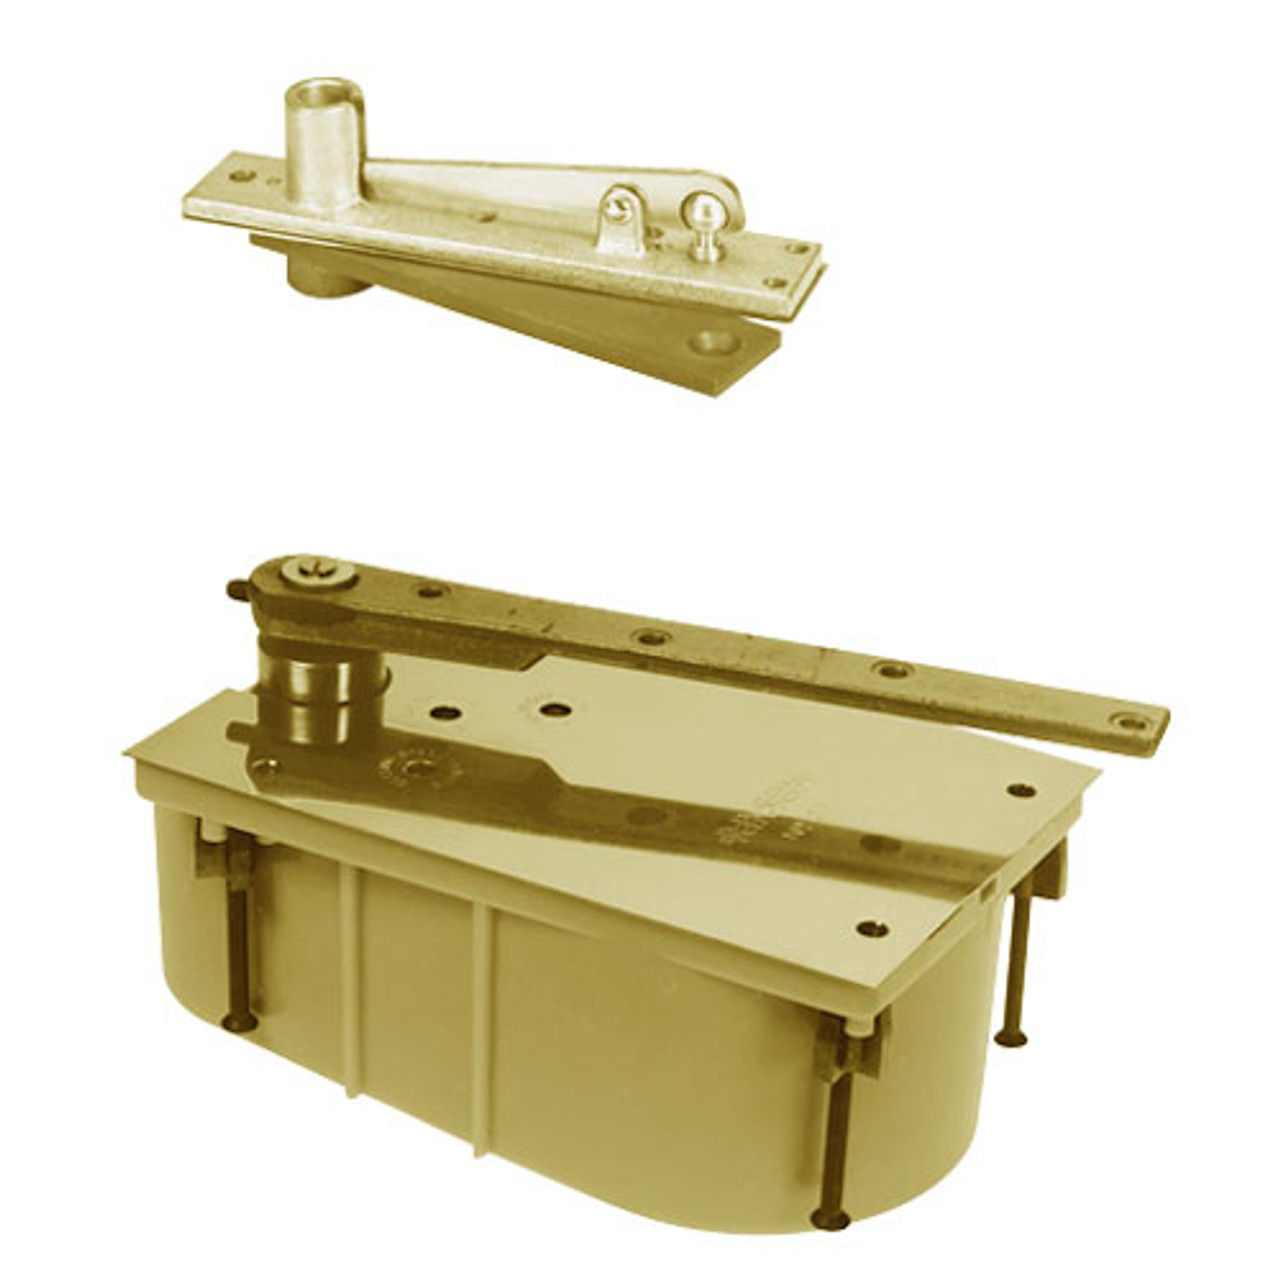 SC28-105S-554-CWF-LH-606 Rixson 28 Series Heavy Duty Single Acting Center Hung Floor Closer with Concealed Arm in Satin Brass Finish